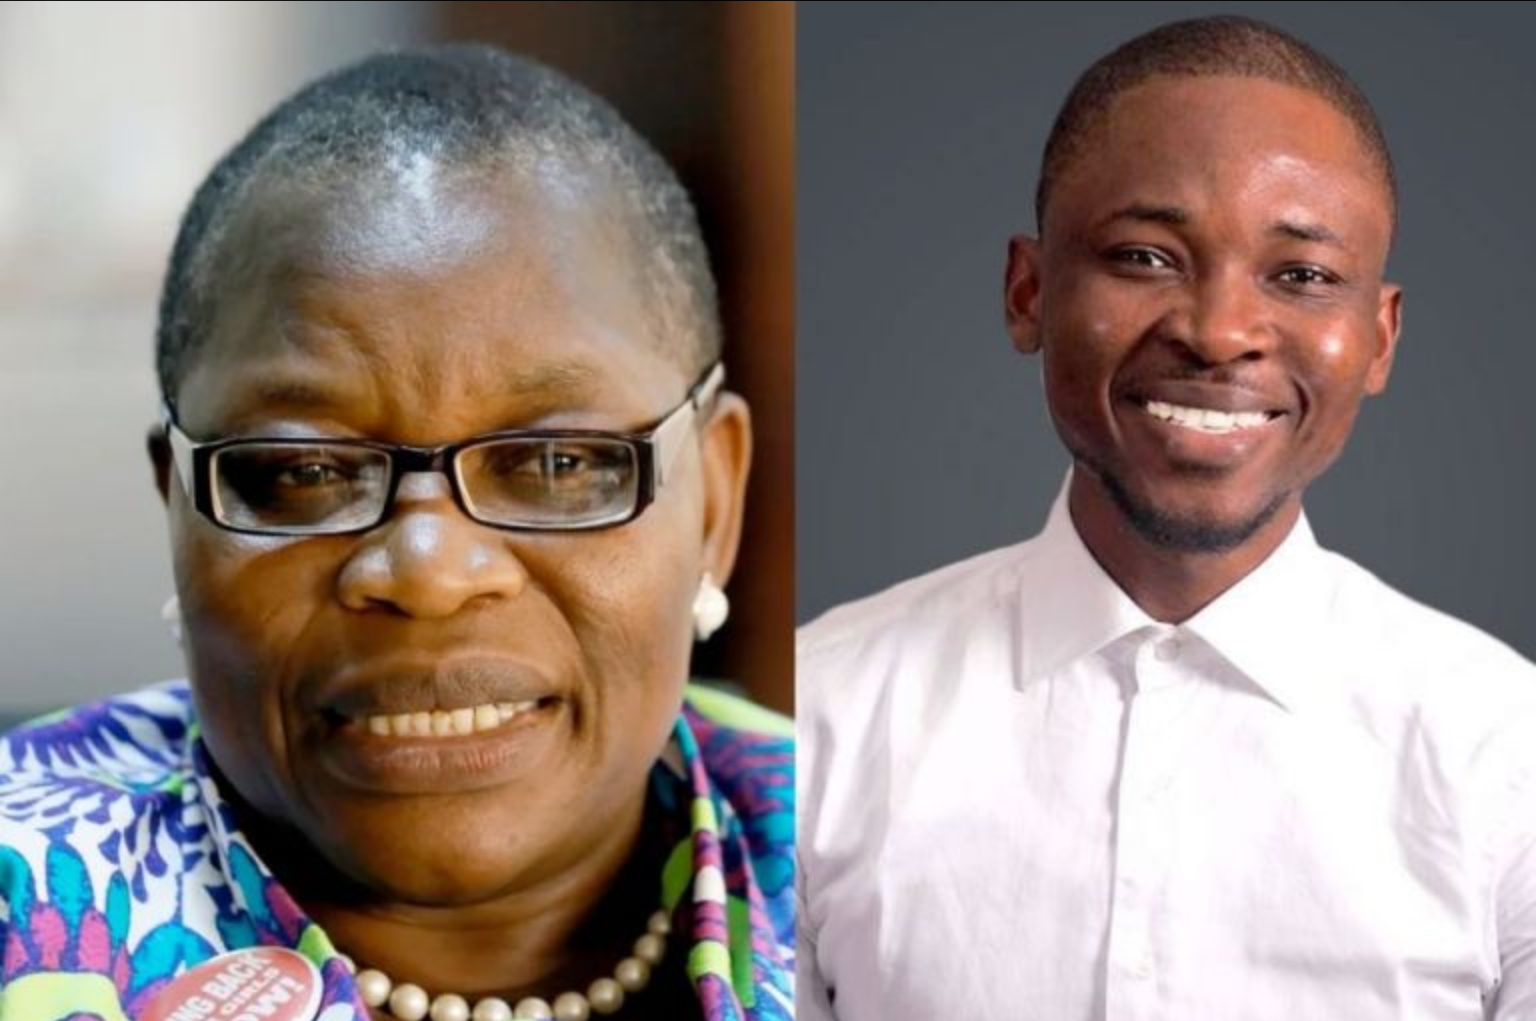 Oby Ezekwesili Asks For Further Investigation, Accuses Omojuwa Of ”Forgery,